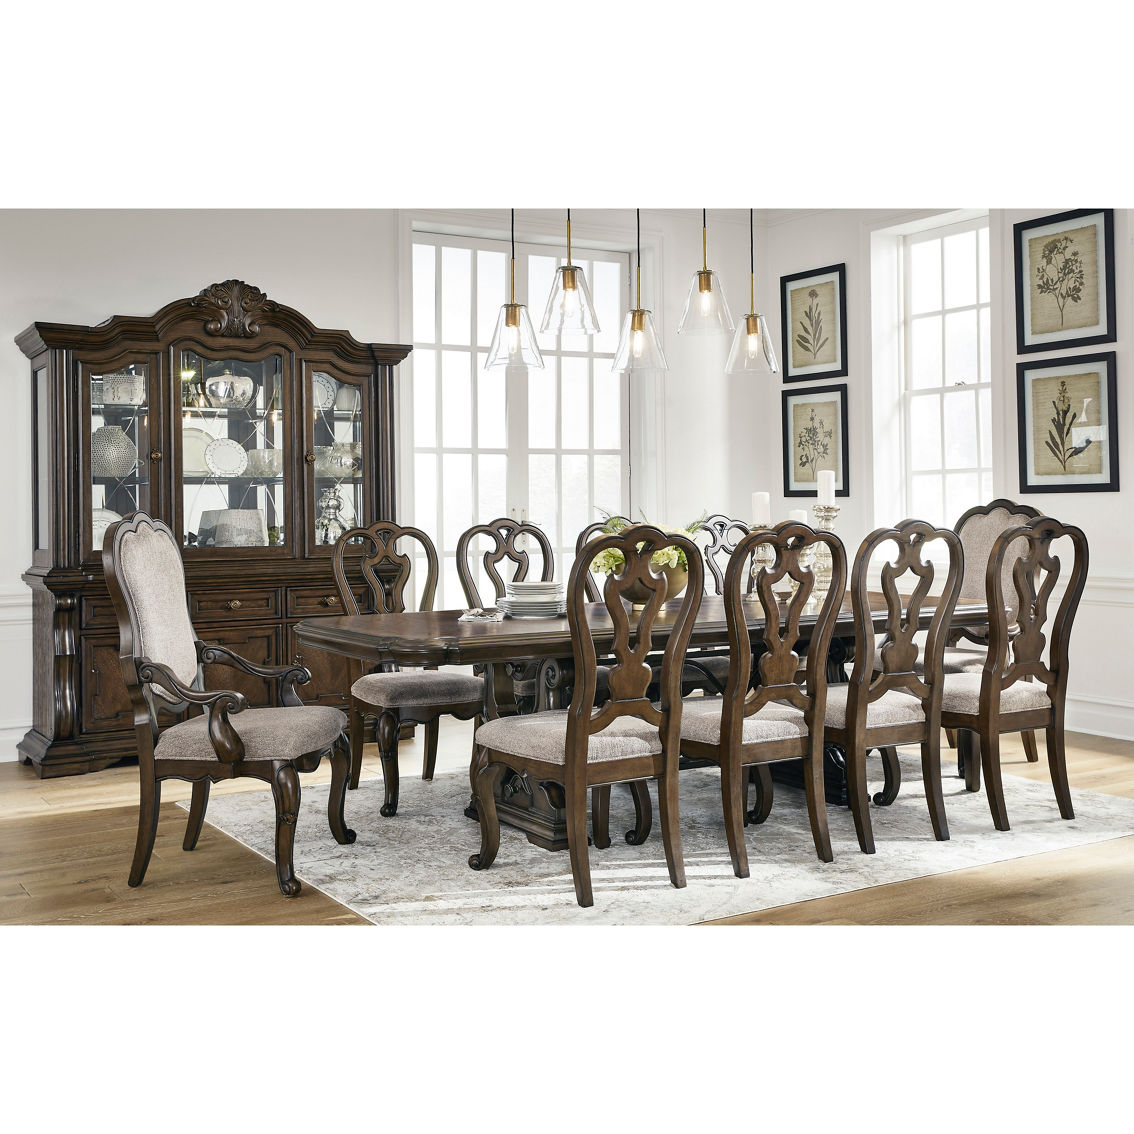 Signature Design by Ashley Maylee Dining 11 pc. Set - Image 2 of 9